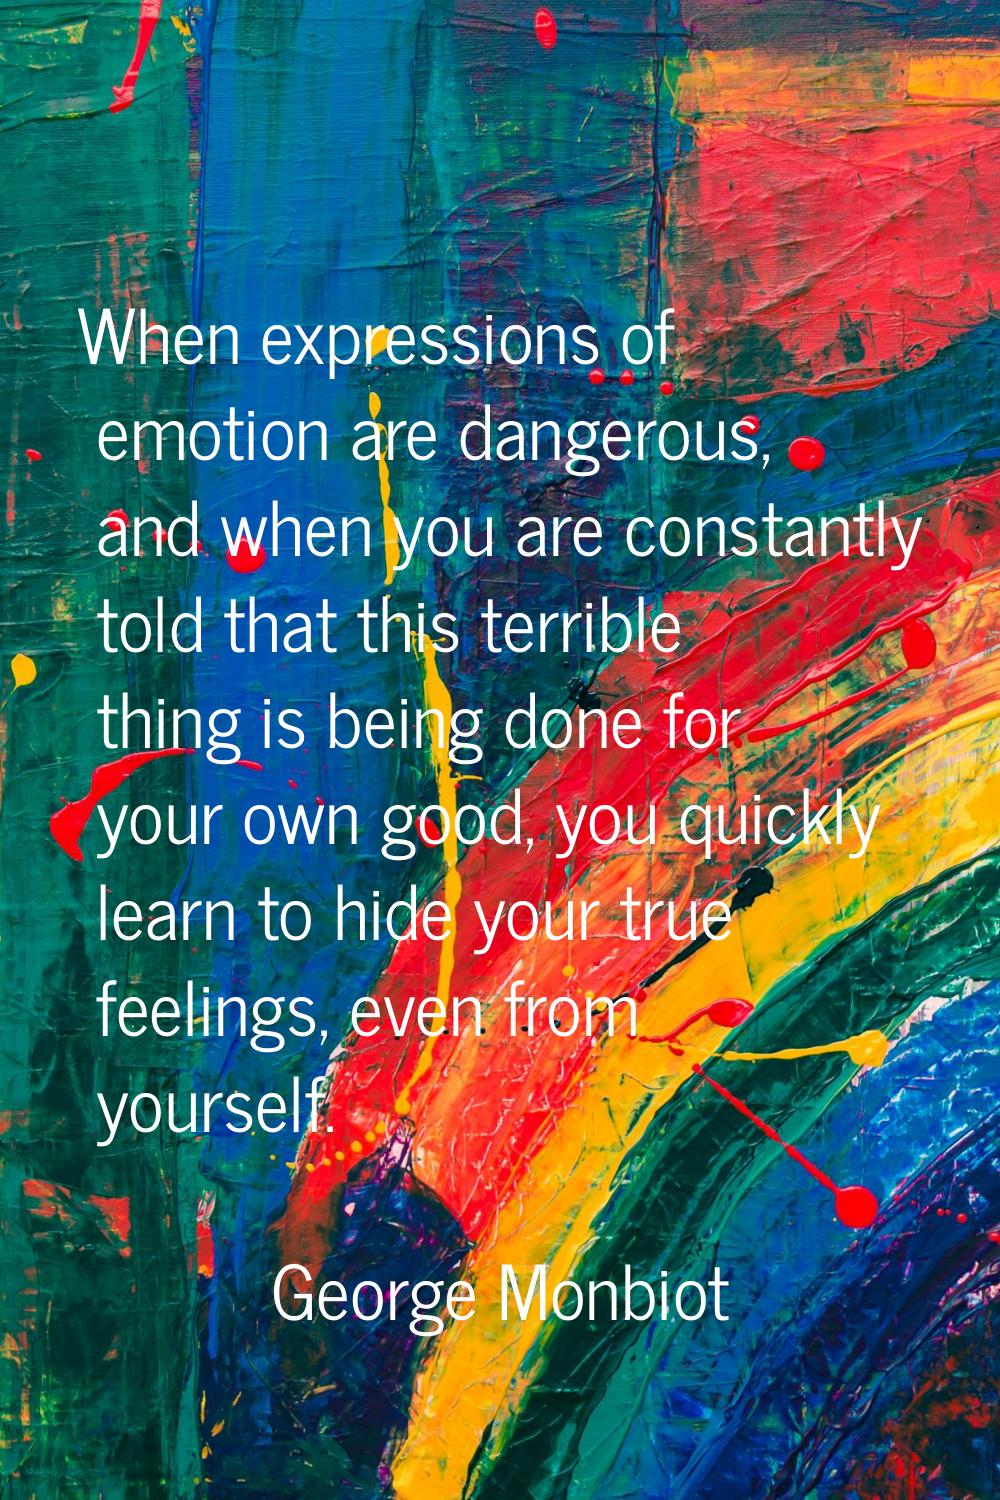 When expressions of emotion are dangerous, and when you are constantly told that this terrible thin